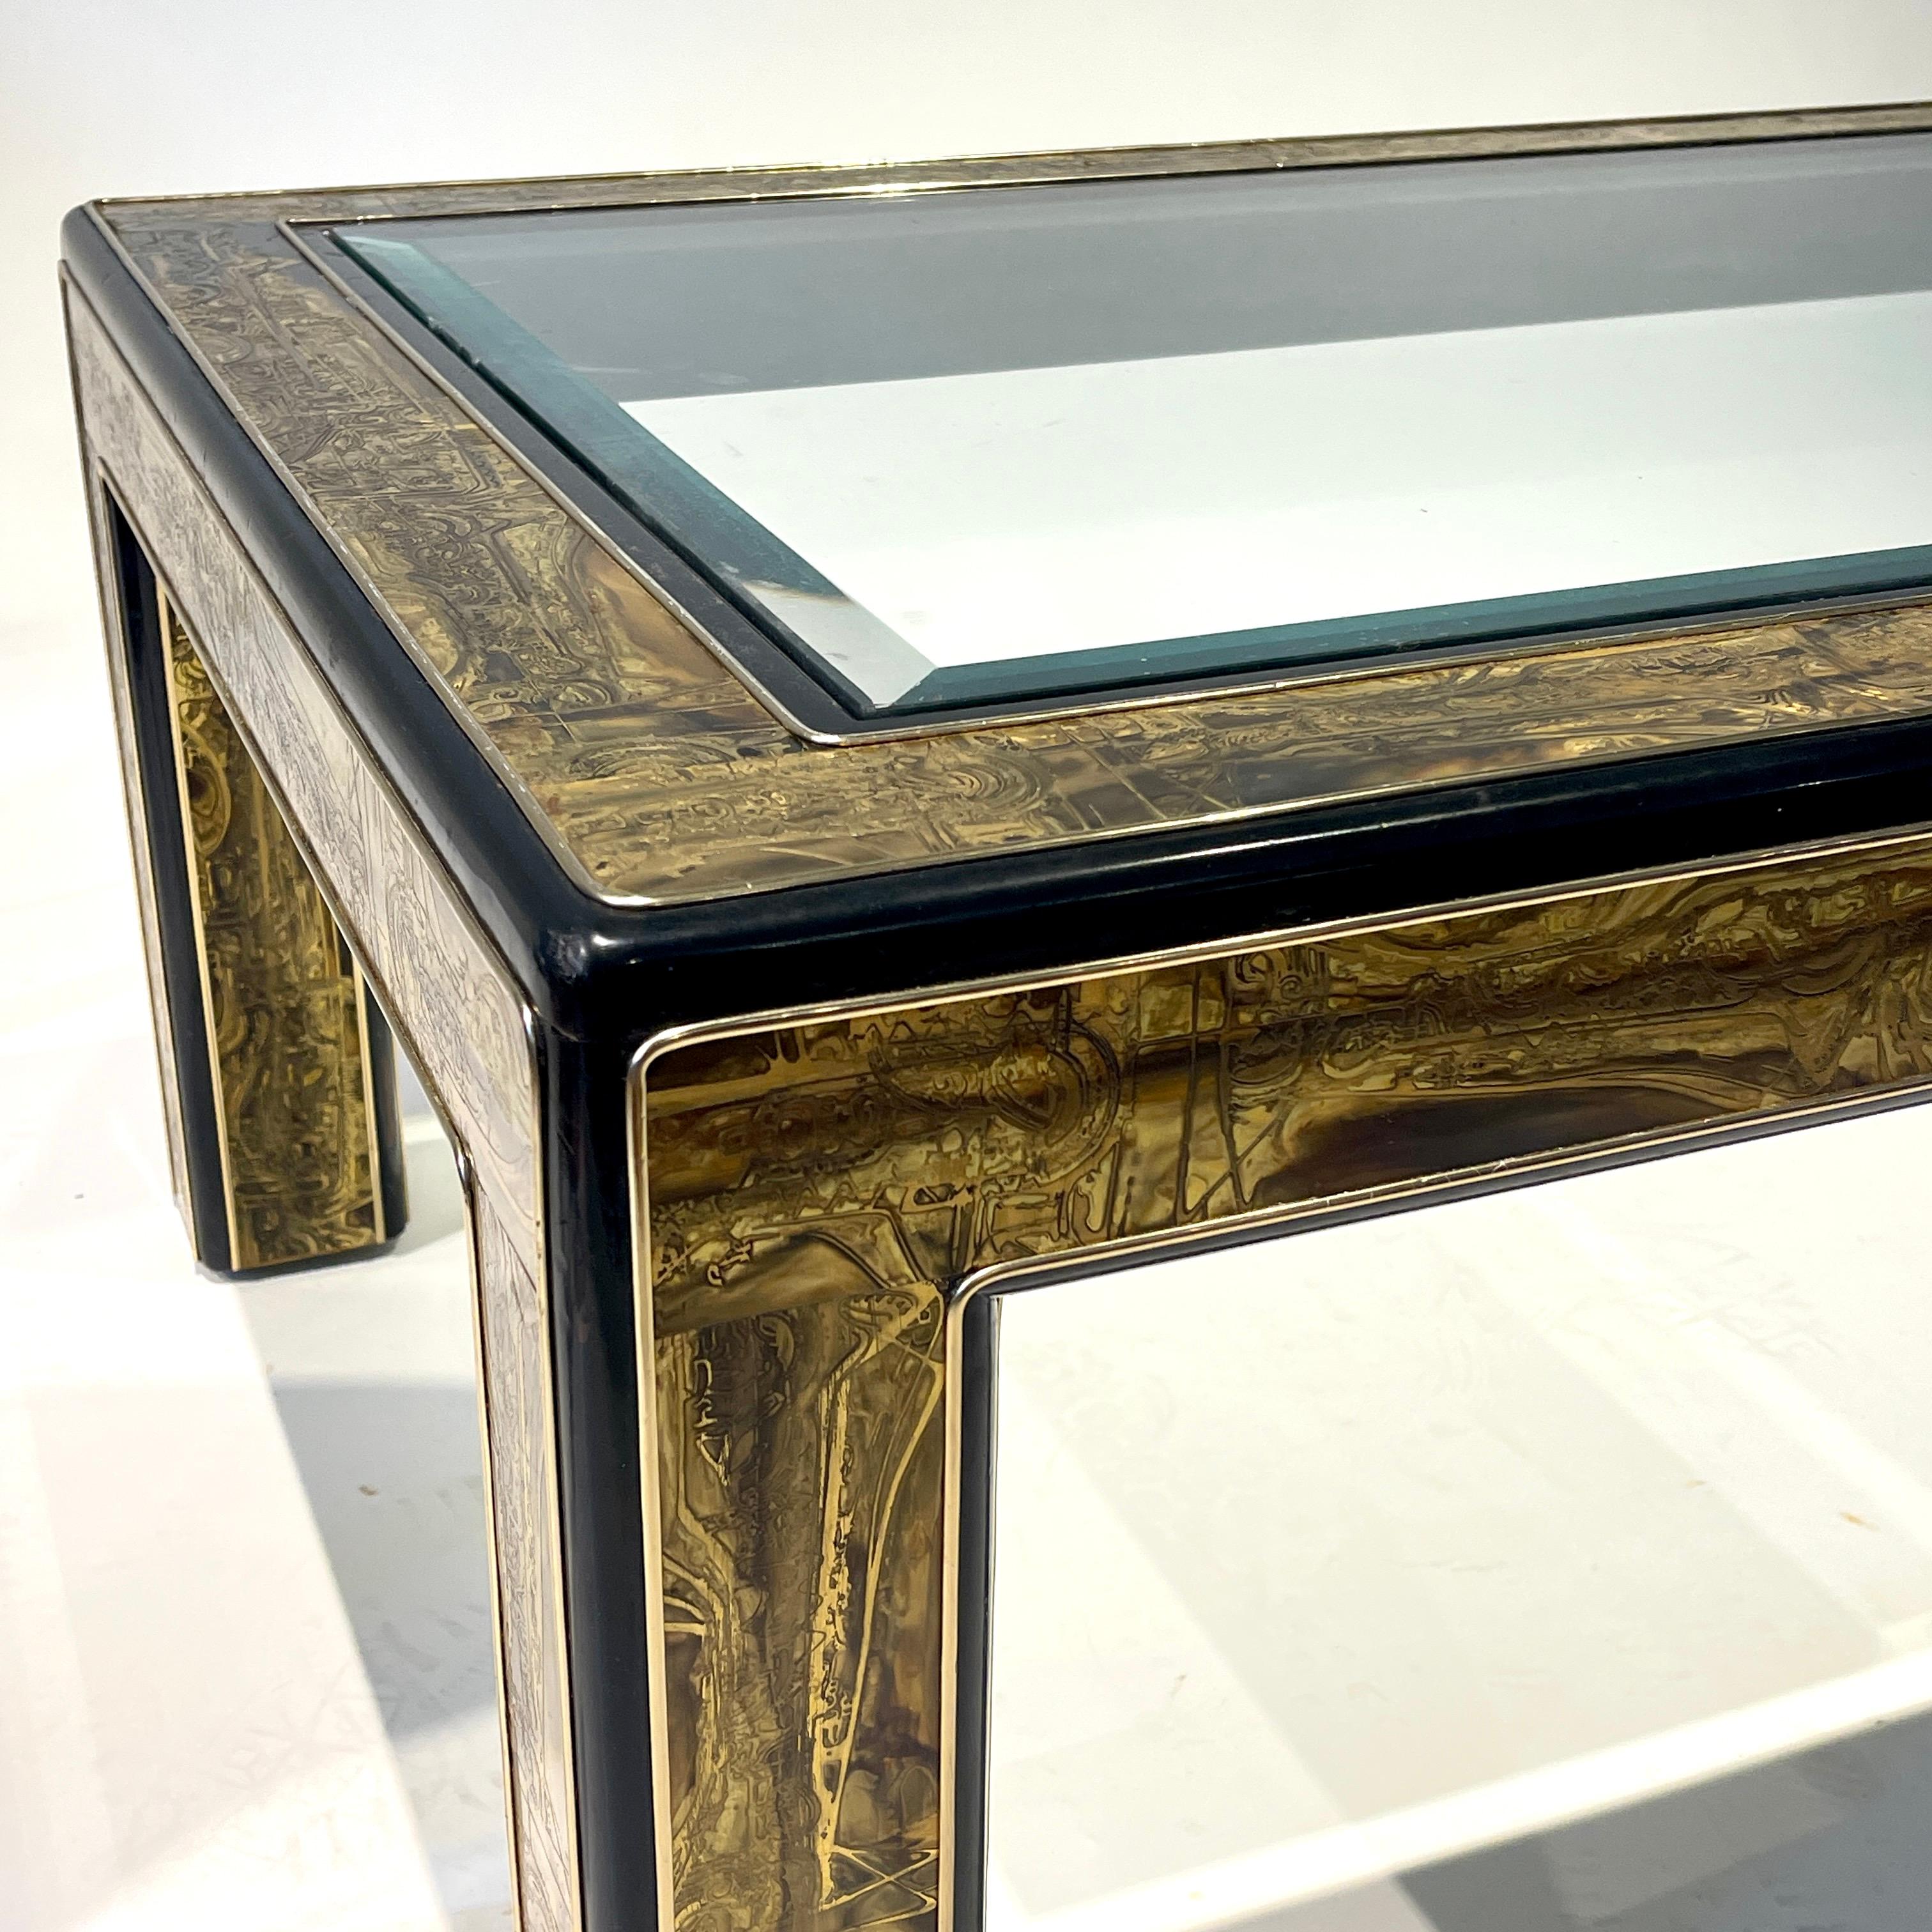 Stunning table by Mastercraft. Constructed of Bernhard Rohne acid etched brass panels with a sleek rounded black lacquered edge.